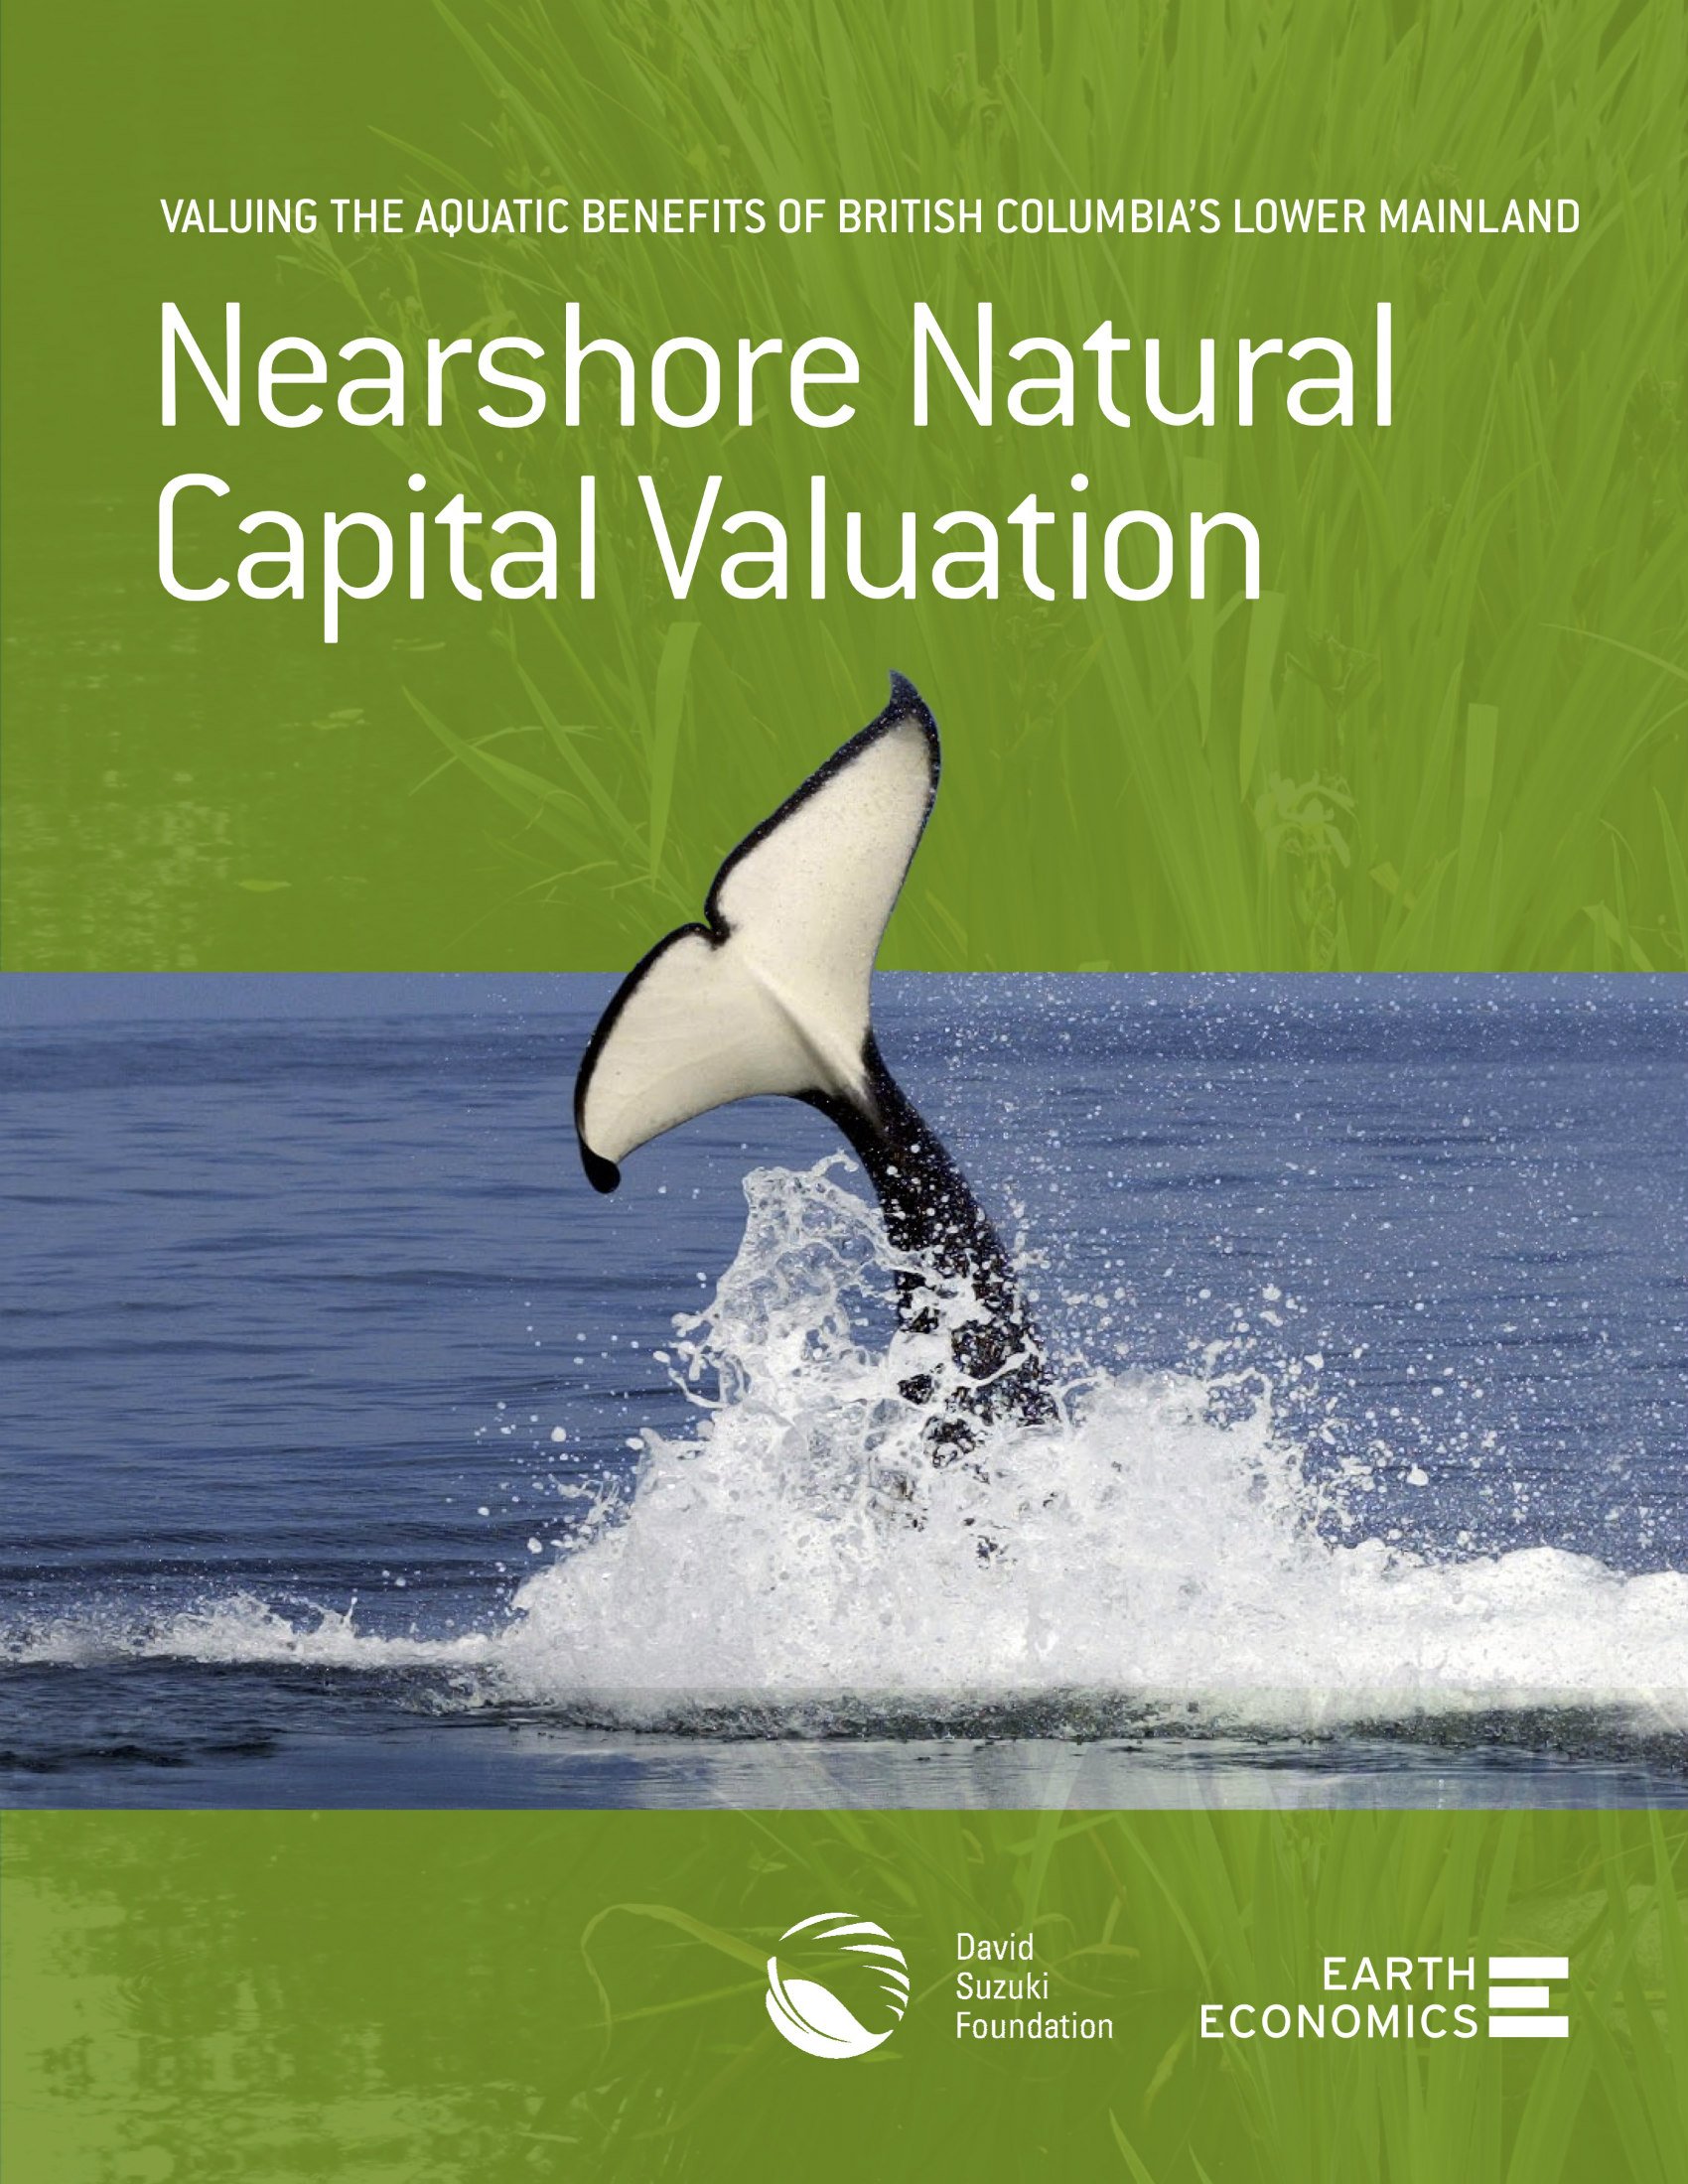 Nearshore Natural Capital Valuation: Valuing the Aquatic Benefits of British Columbia's Lower Mainland